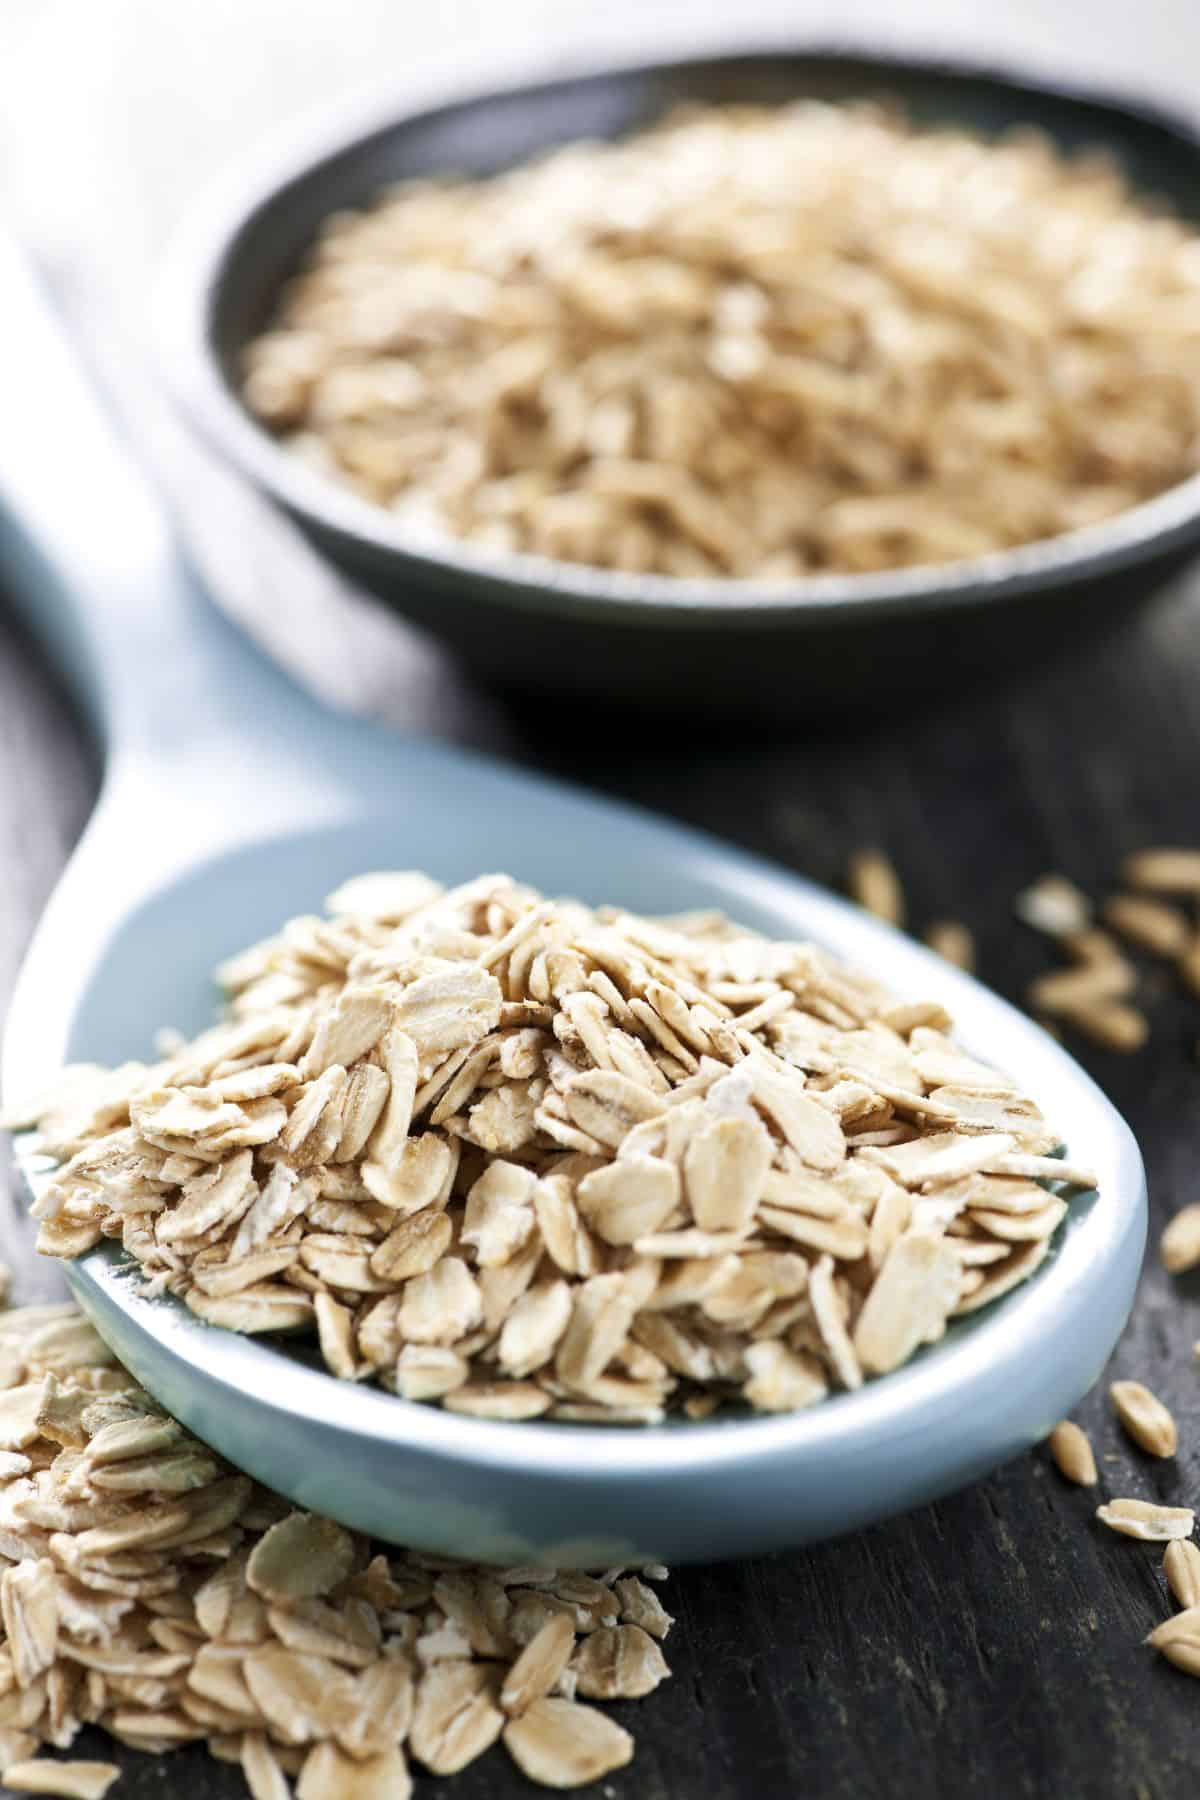 Spoonful of rolled oats with scattered oats on dark surface.